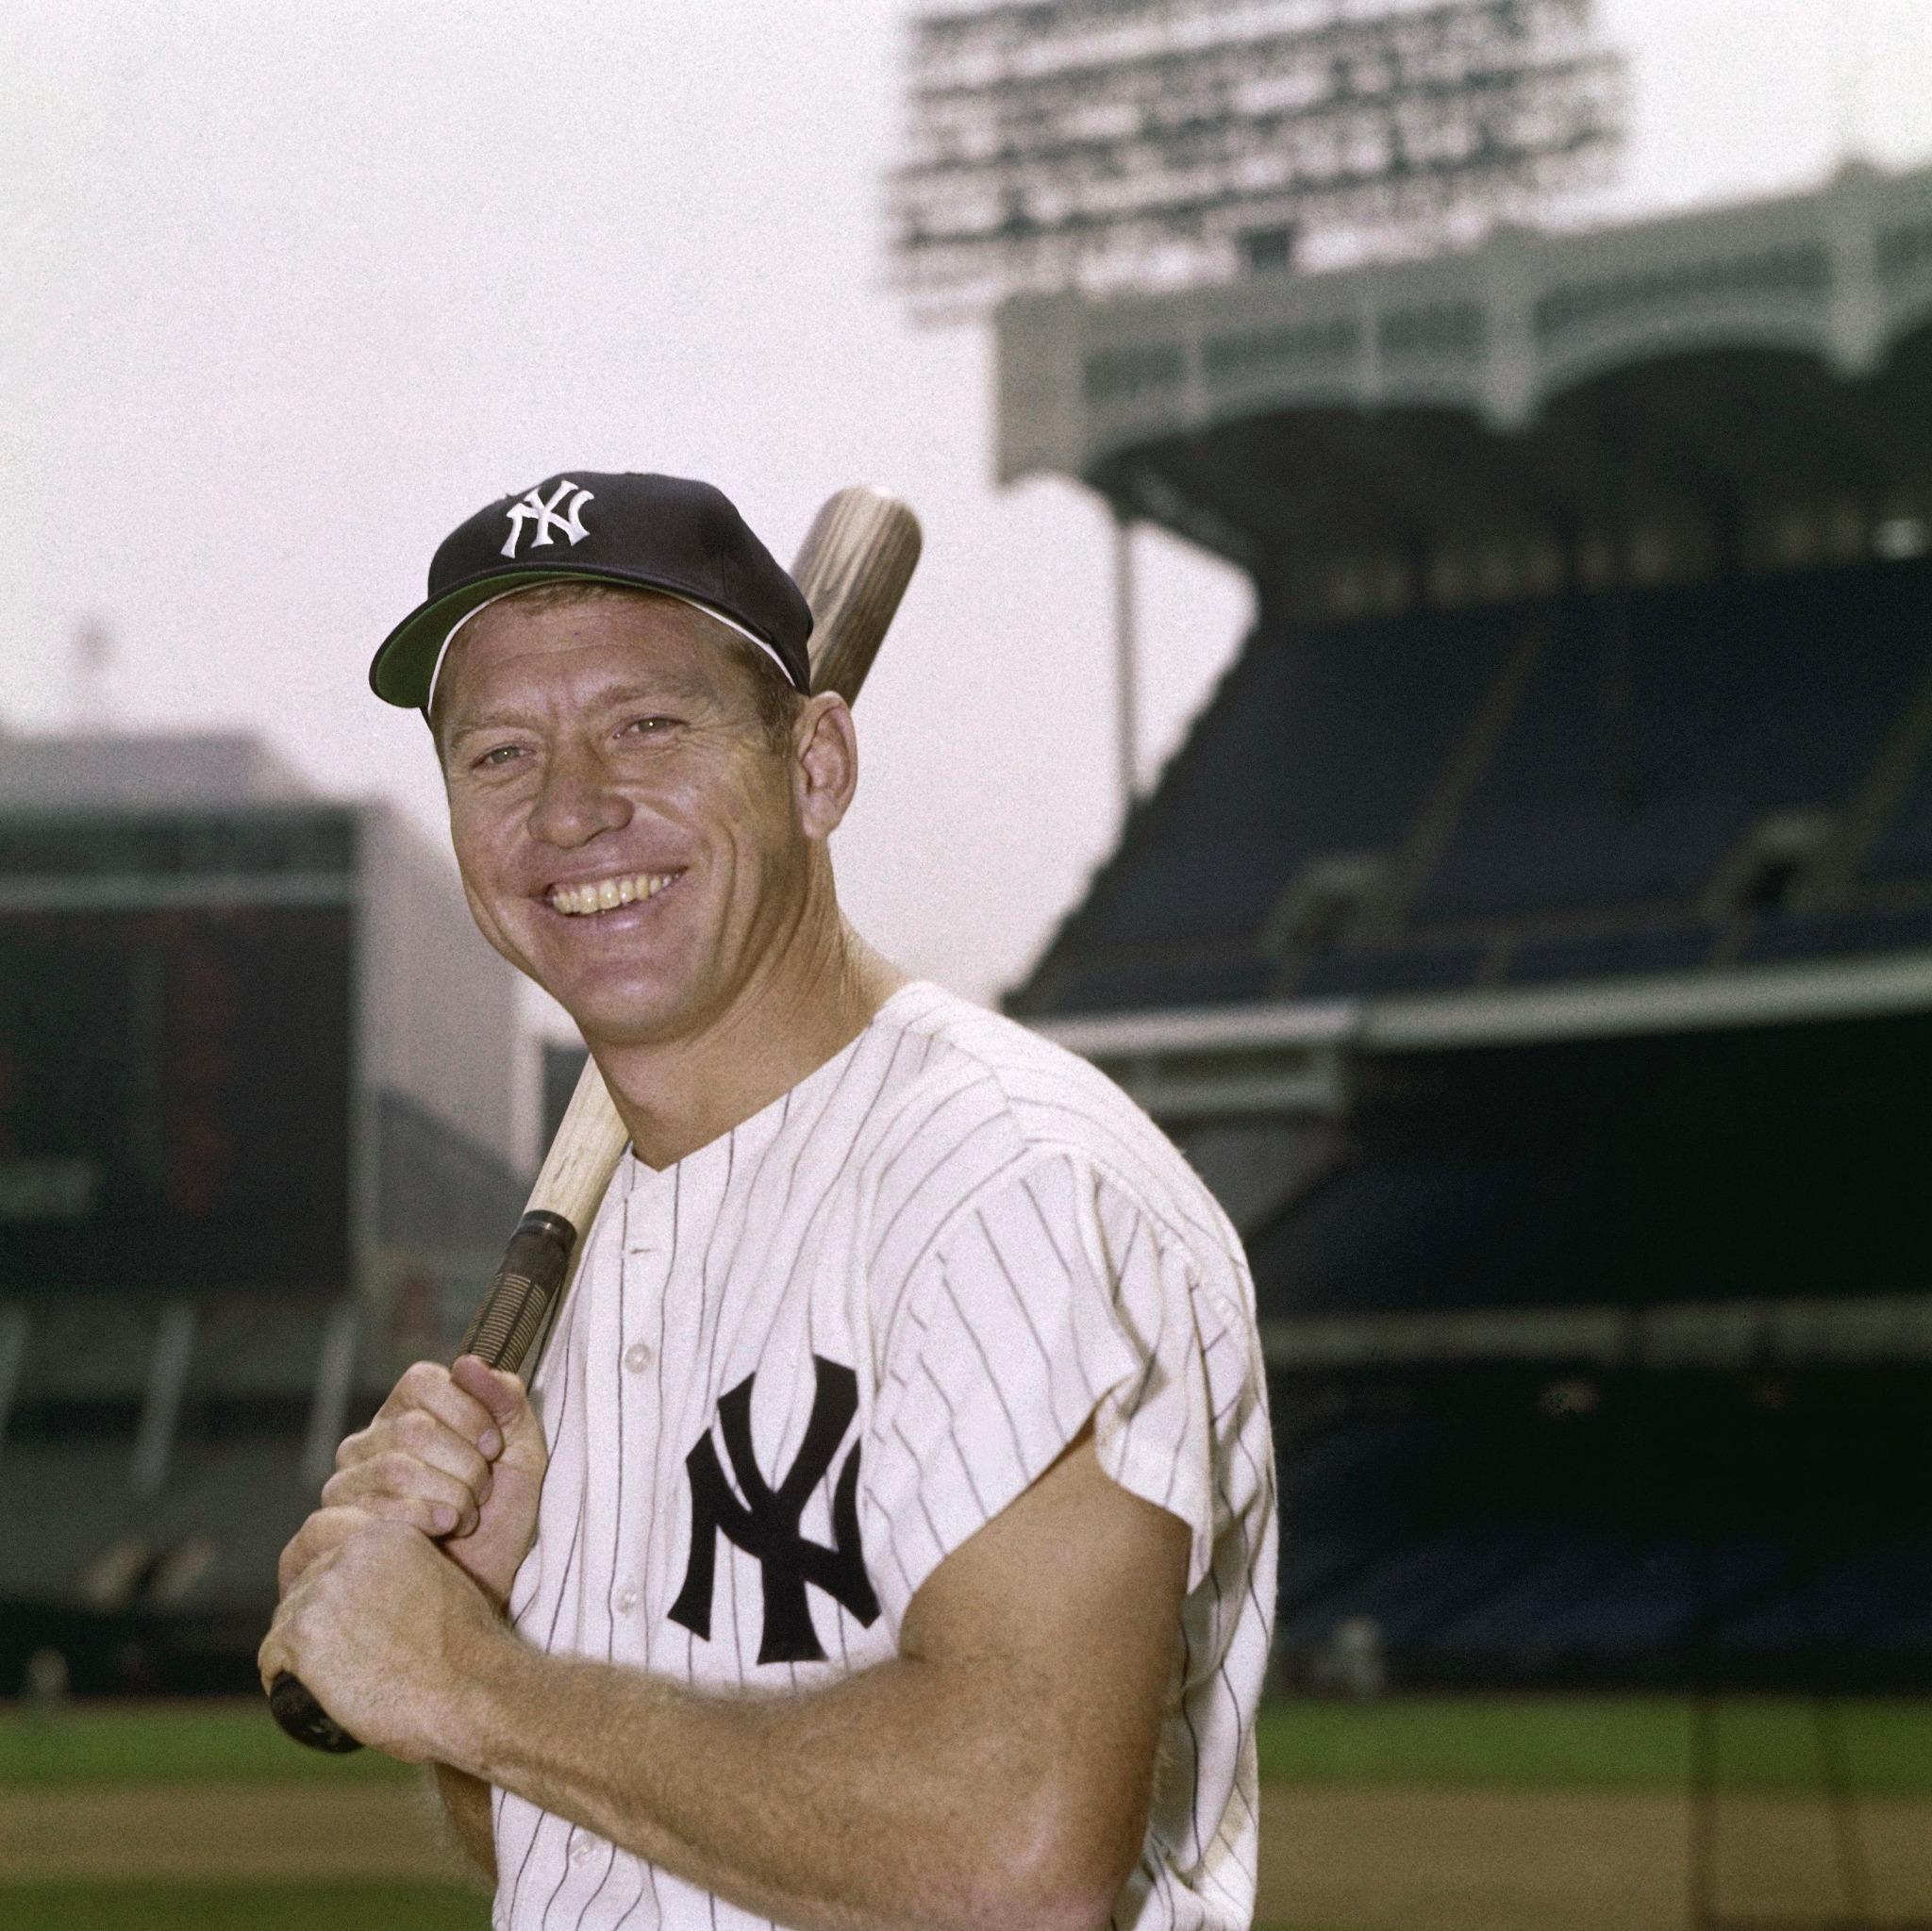   . legend Mickey Mantle was born on this date in 1931.  Happy Bday Mick!